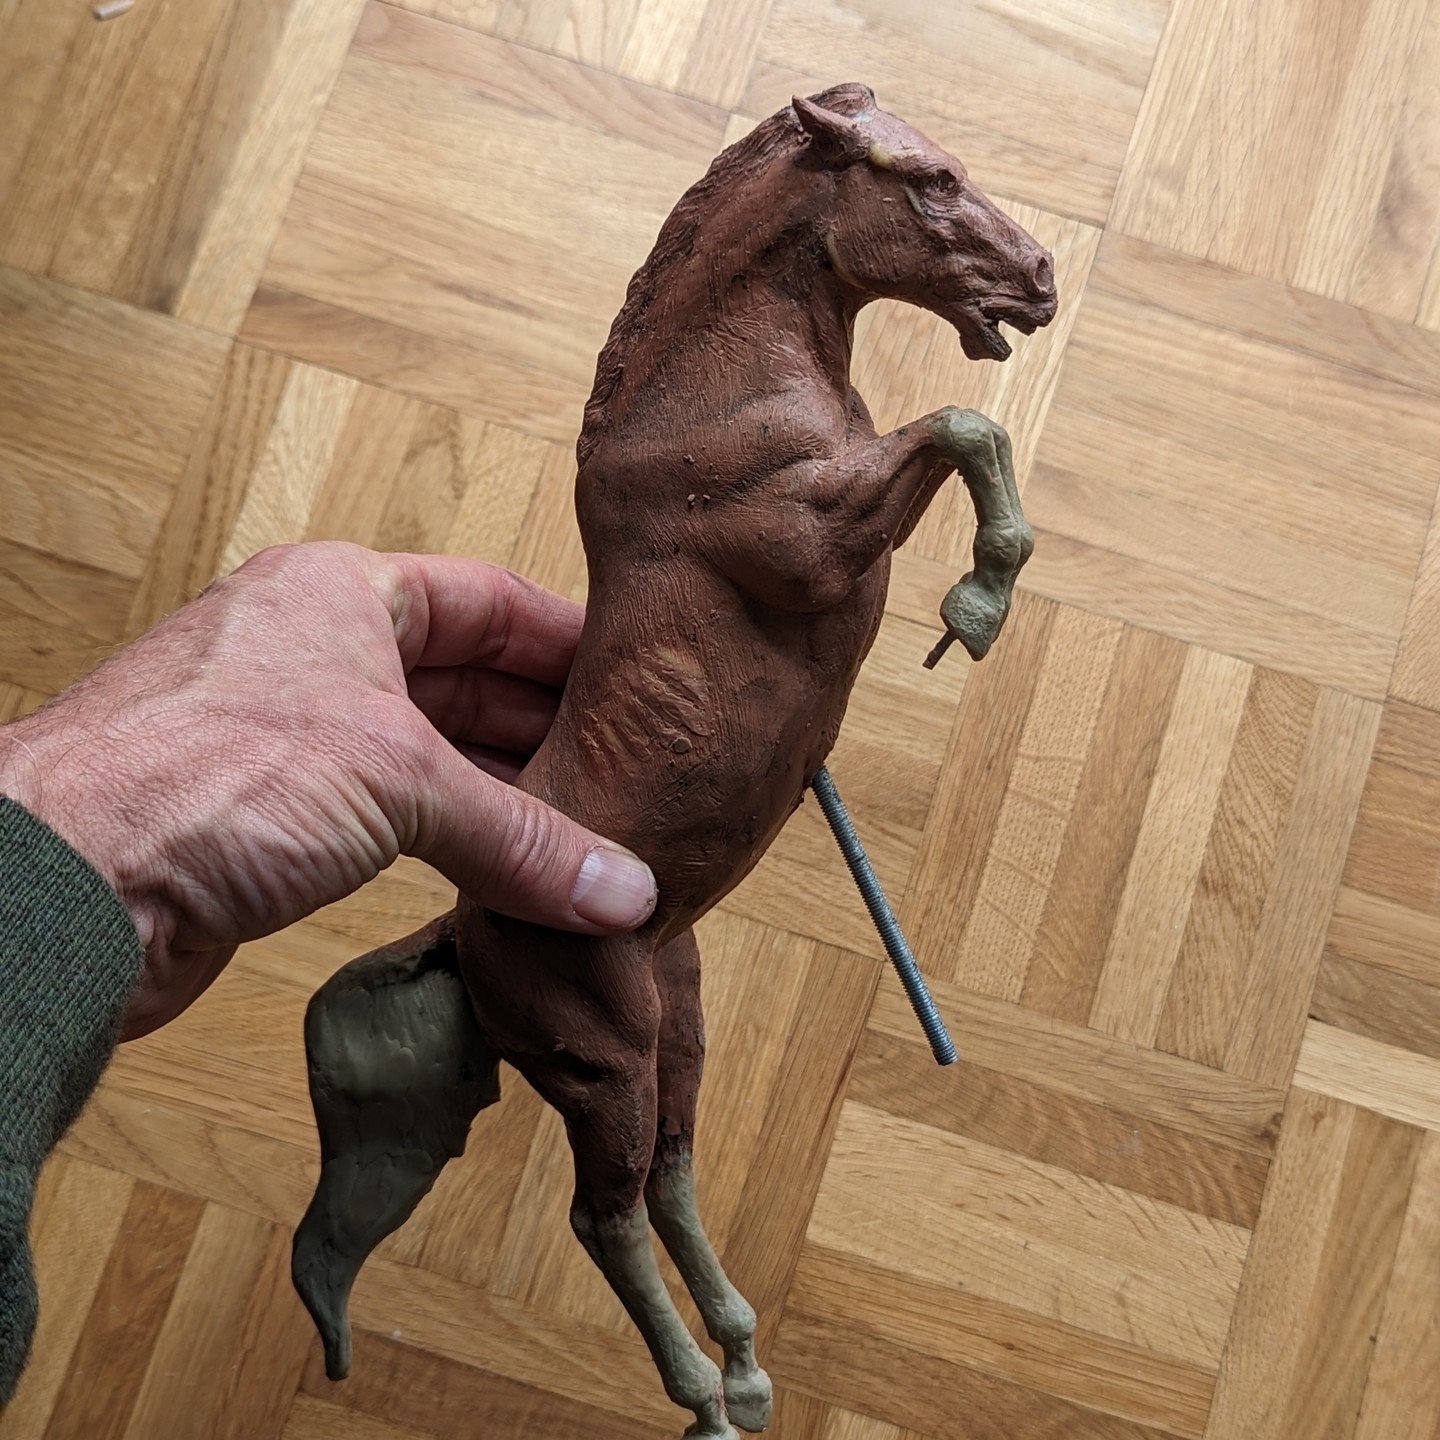 Lovely to be sculpting again. This horse has been collecting dust in the cupboard for years. Great to be working on it again today.

#equinesculpture #horsesculpture #horseart #horseanatomy #equineanatomy #anatomyofthehorse #bayer #bayer #miniature #